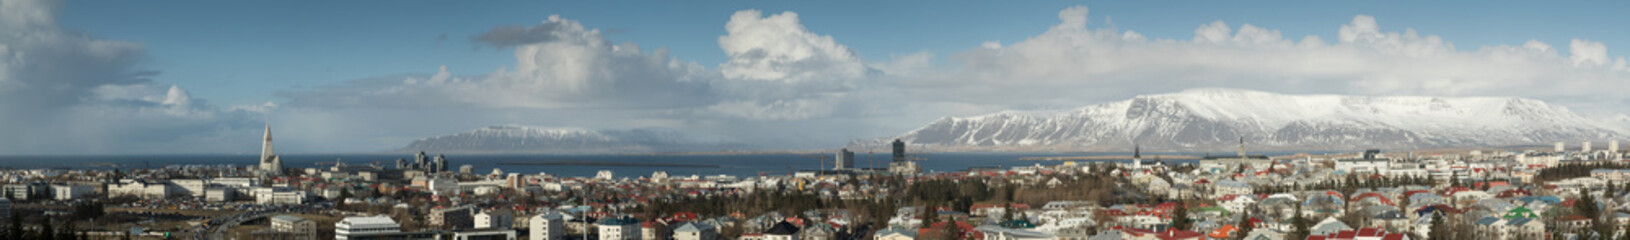 Fototapeta na wymiar Panorama of Reykjavik skyline showing Hallgrimskirkja church cathedral and the mountains in the background.